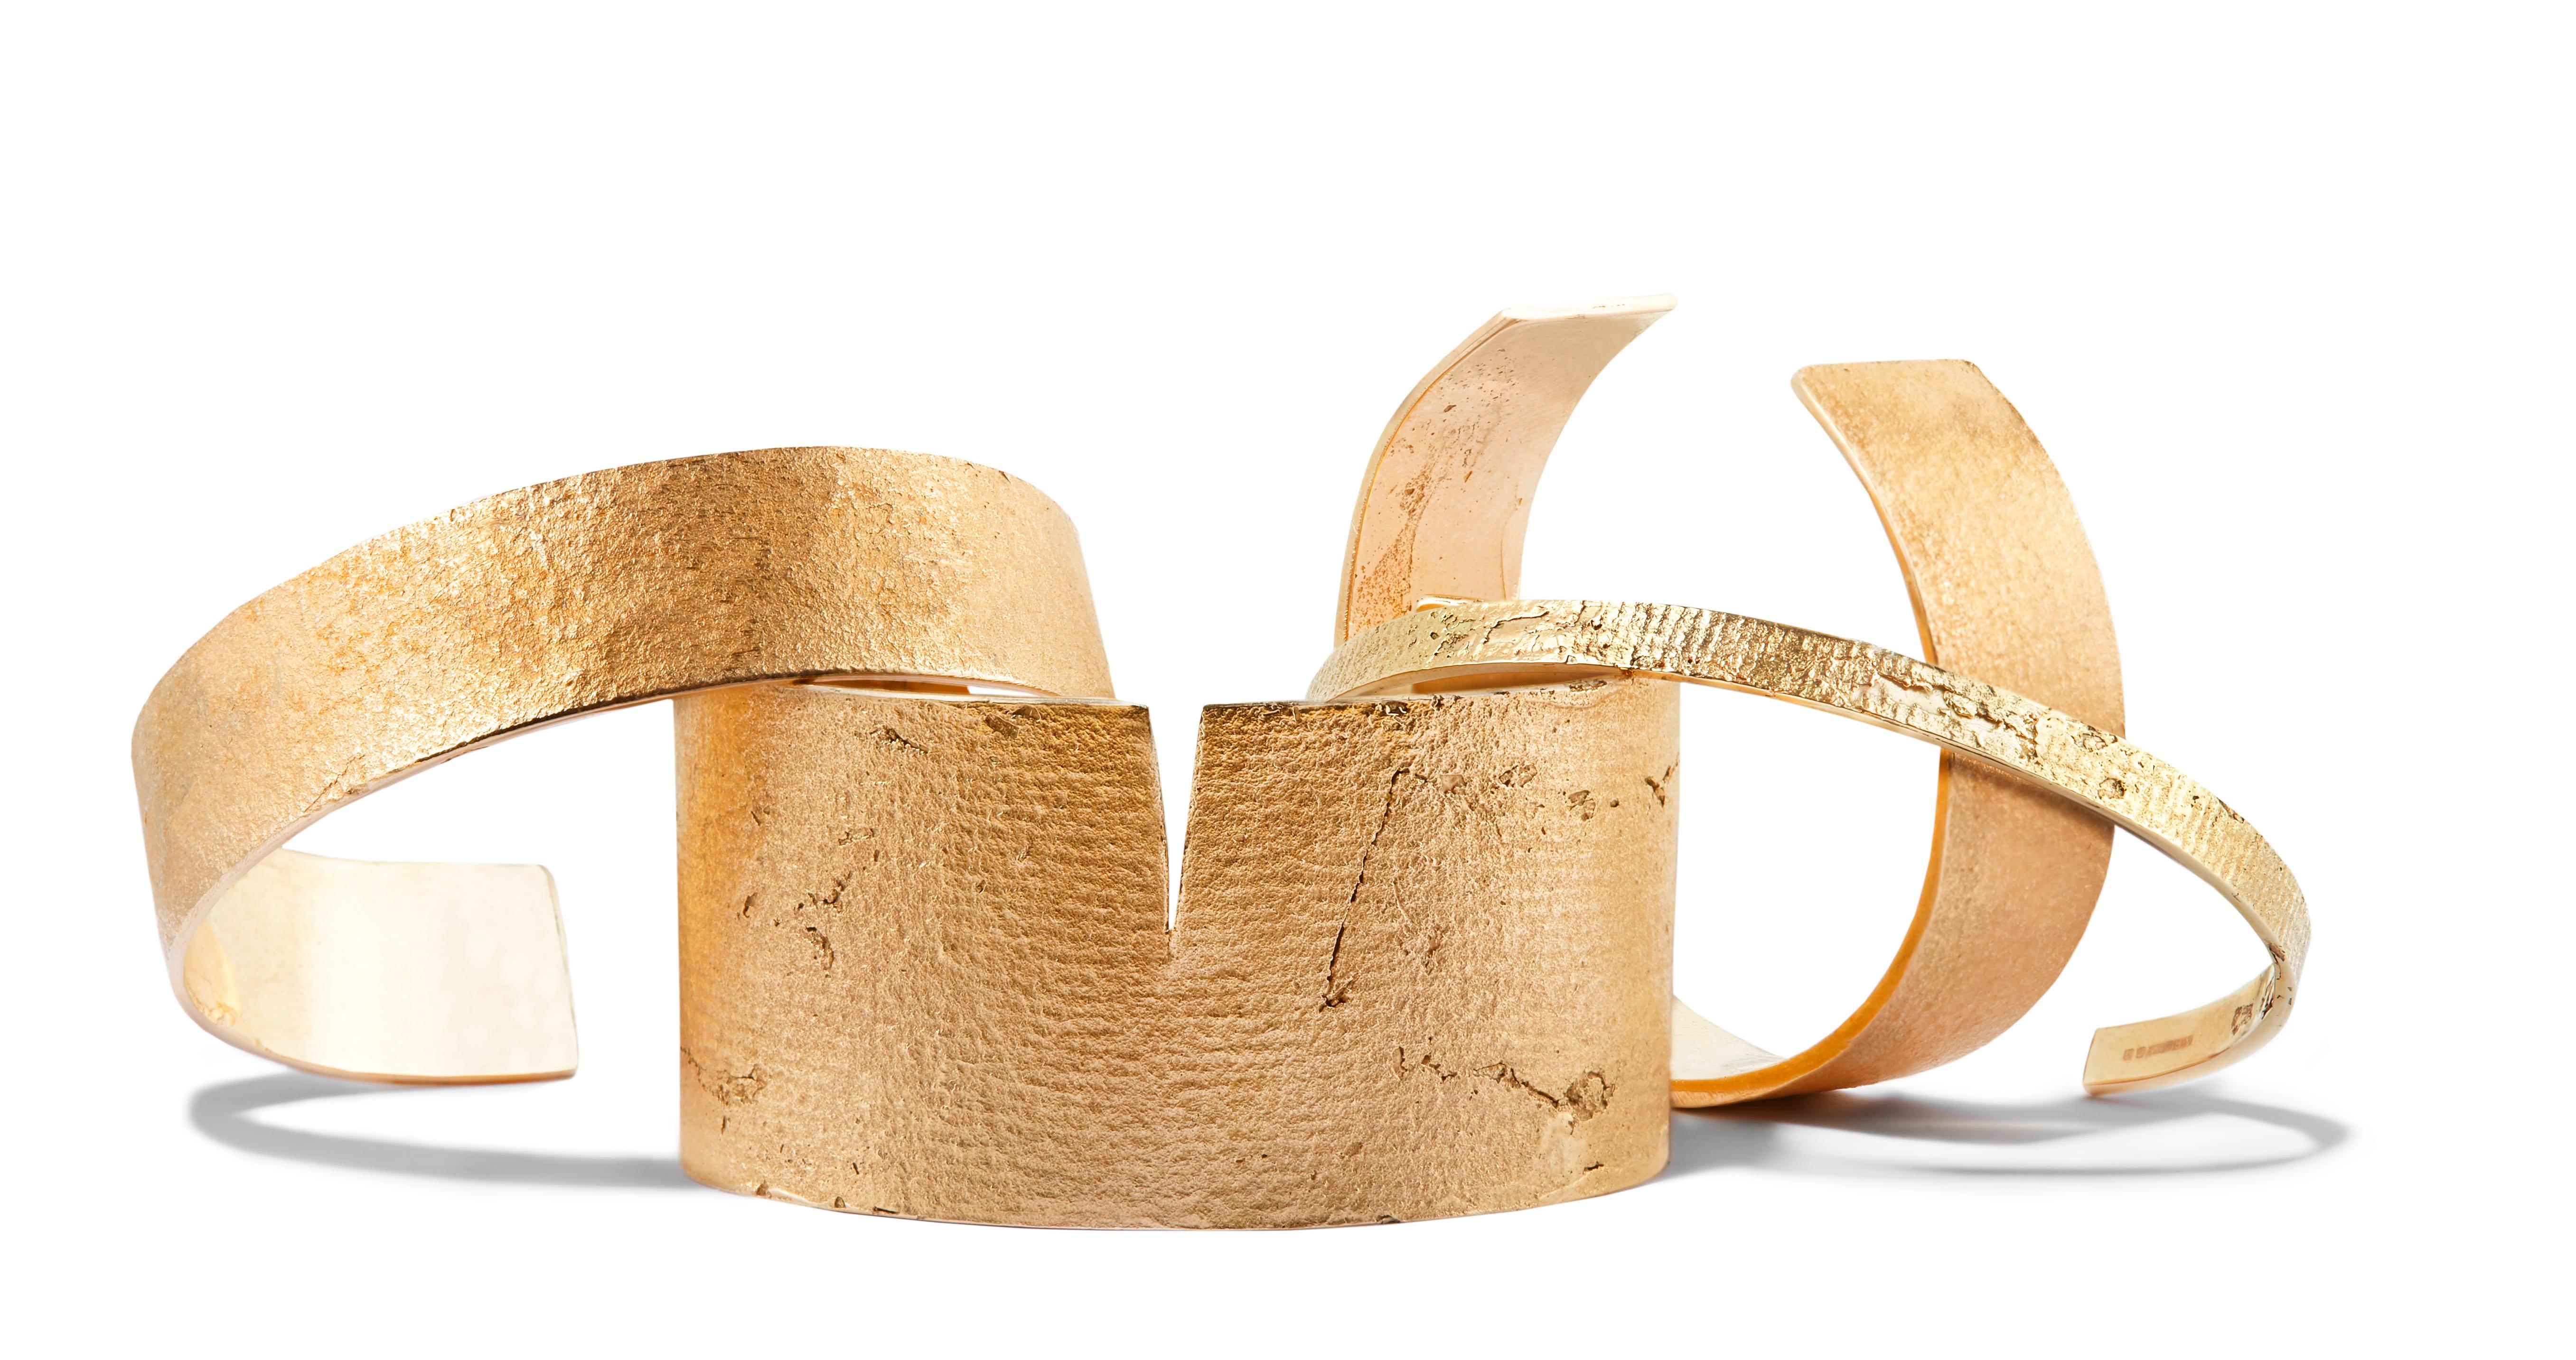 Crafted in solid, glowing bronze, the Split Cuff is a subtle statement piece for every day. The unique texture and split detail add interest to this classic wide cuff. 

Every piece in this collection is individually hand-crafted in paper and cast